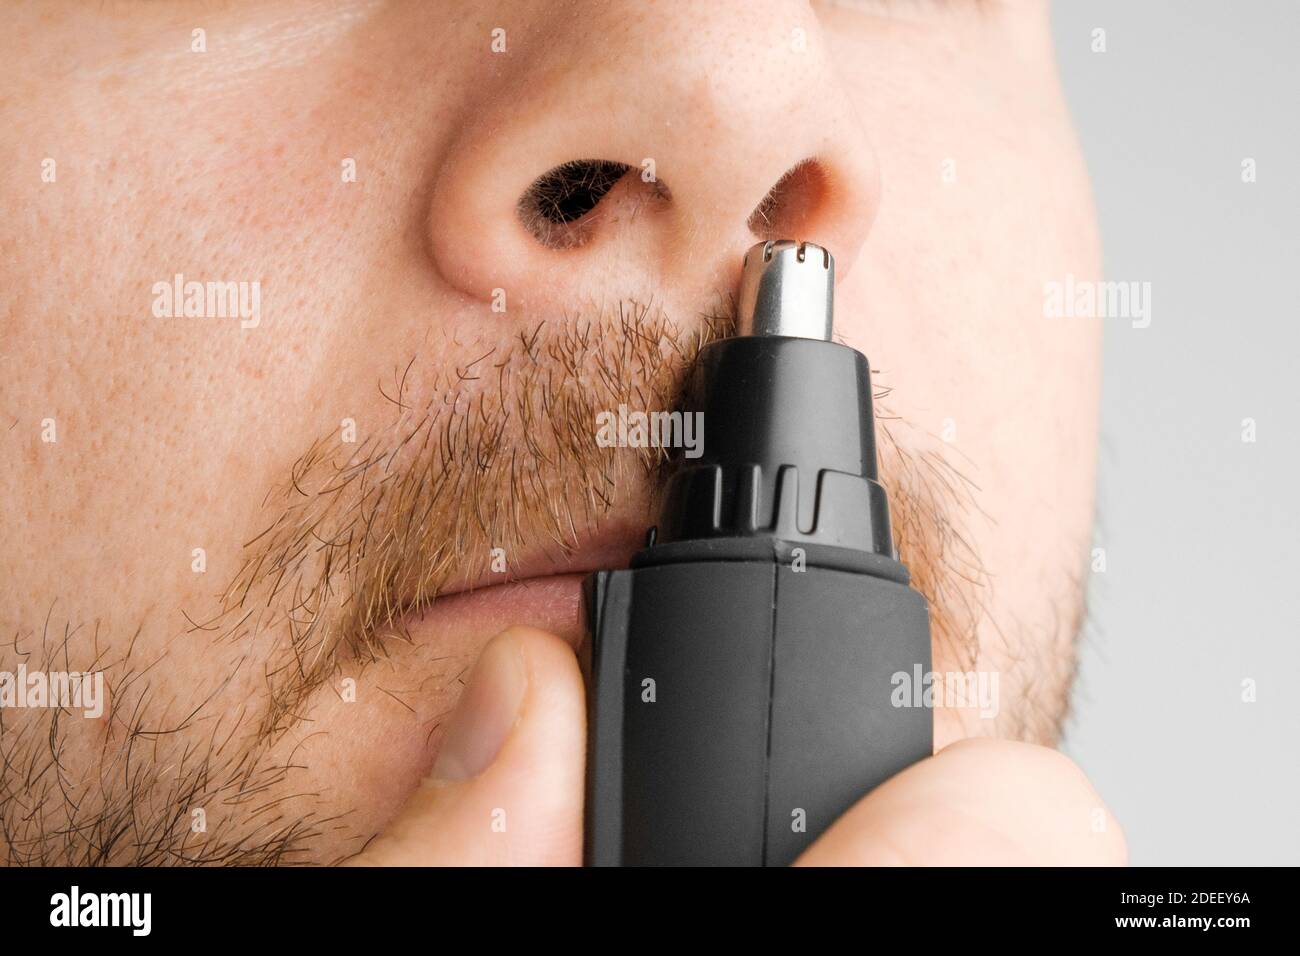 Close up man removing hair from nose using electric trimmer on the grey background. Morning routine. Stock Photo